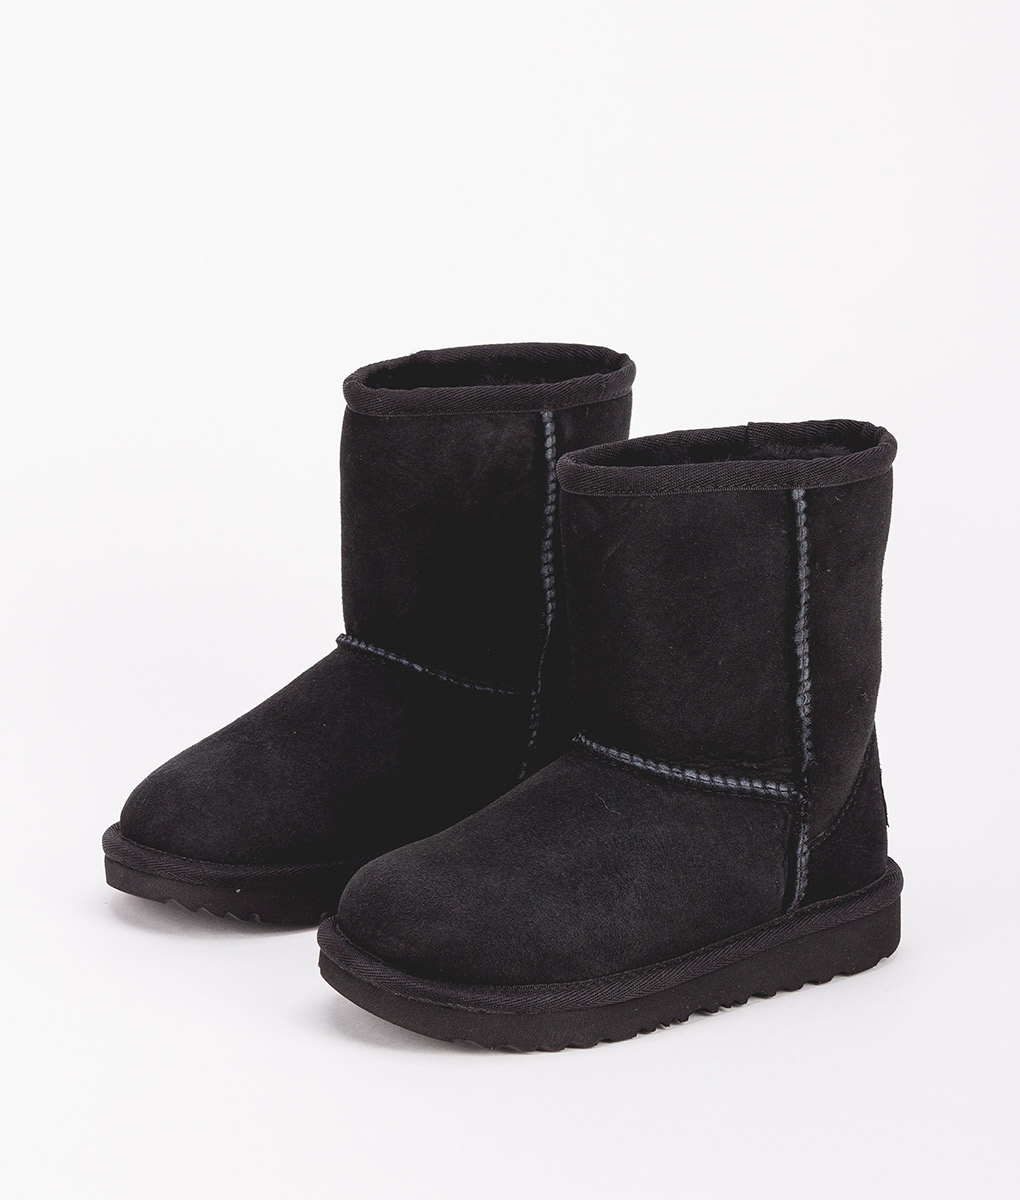 UGG Kids Ankle Boots 1017703T CLASSIC II, Black 1